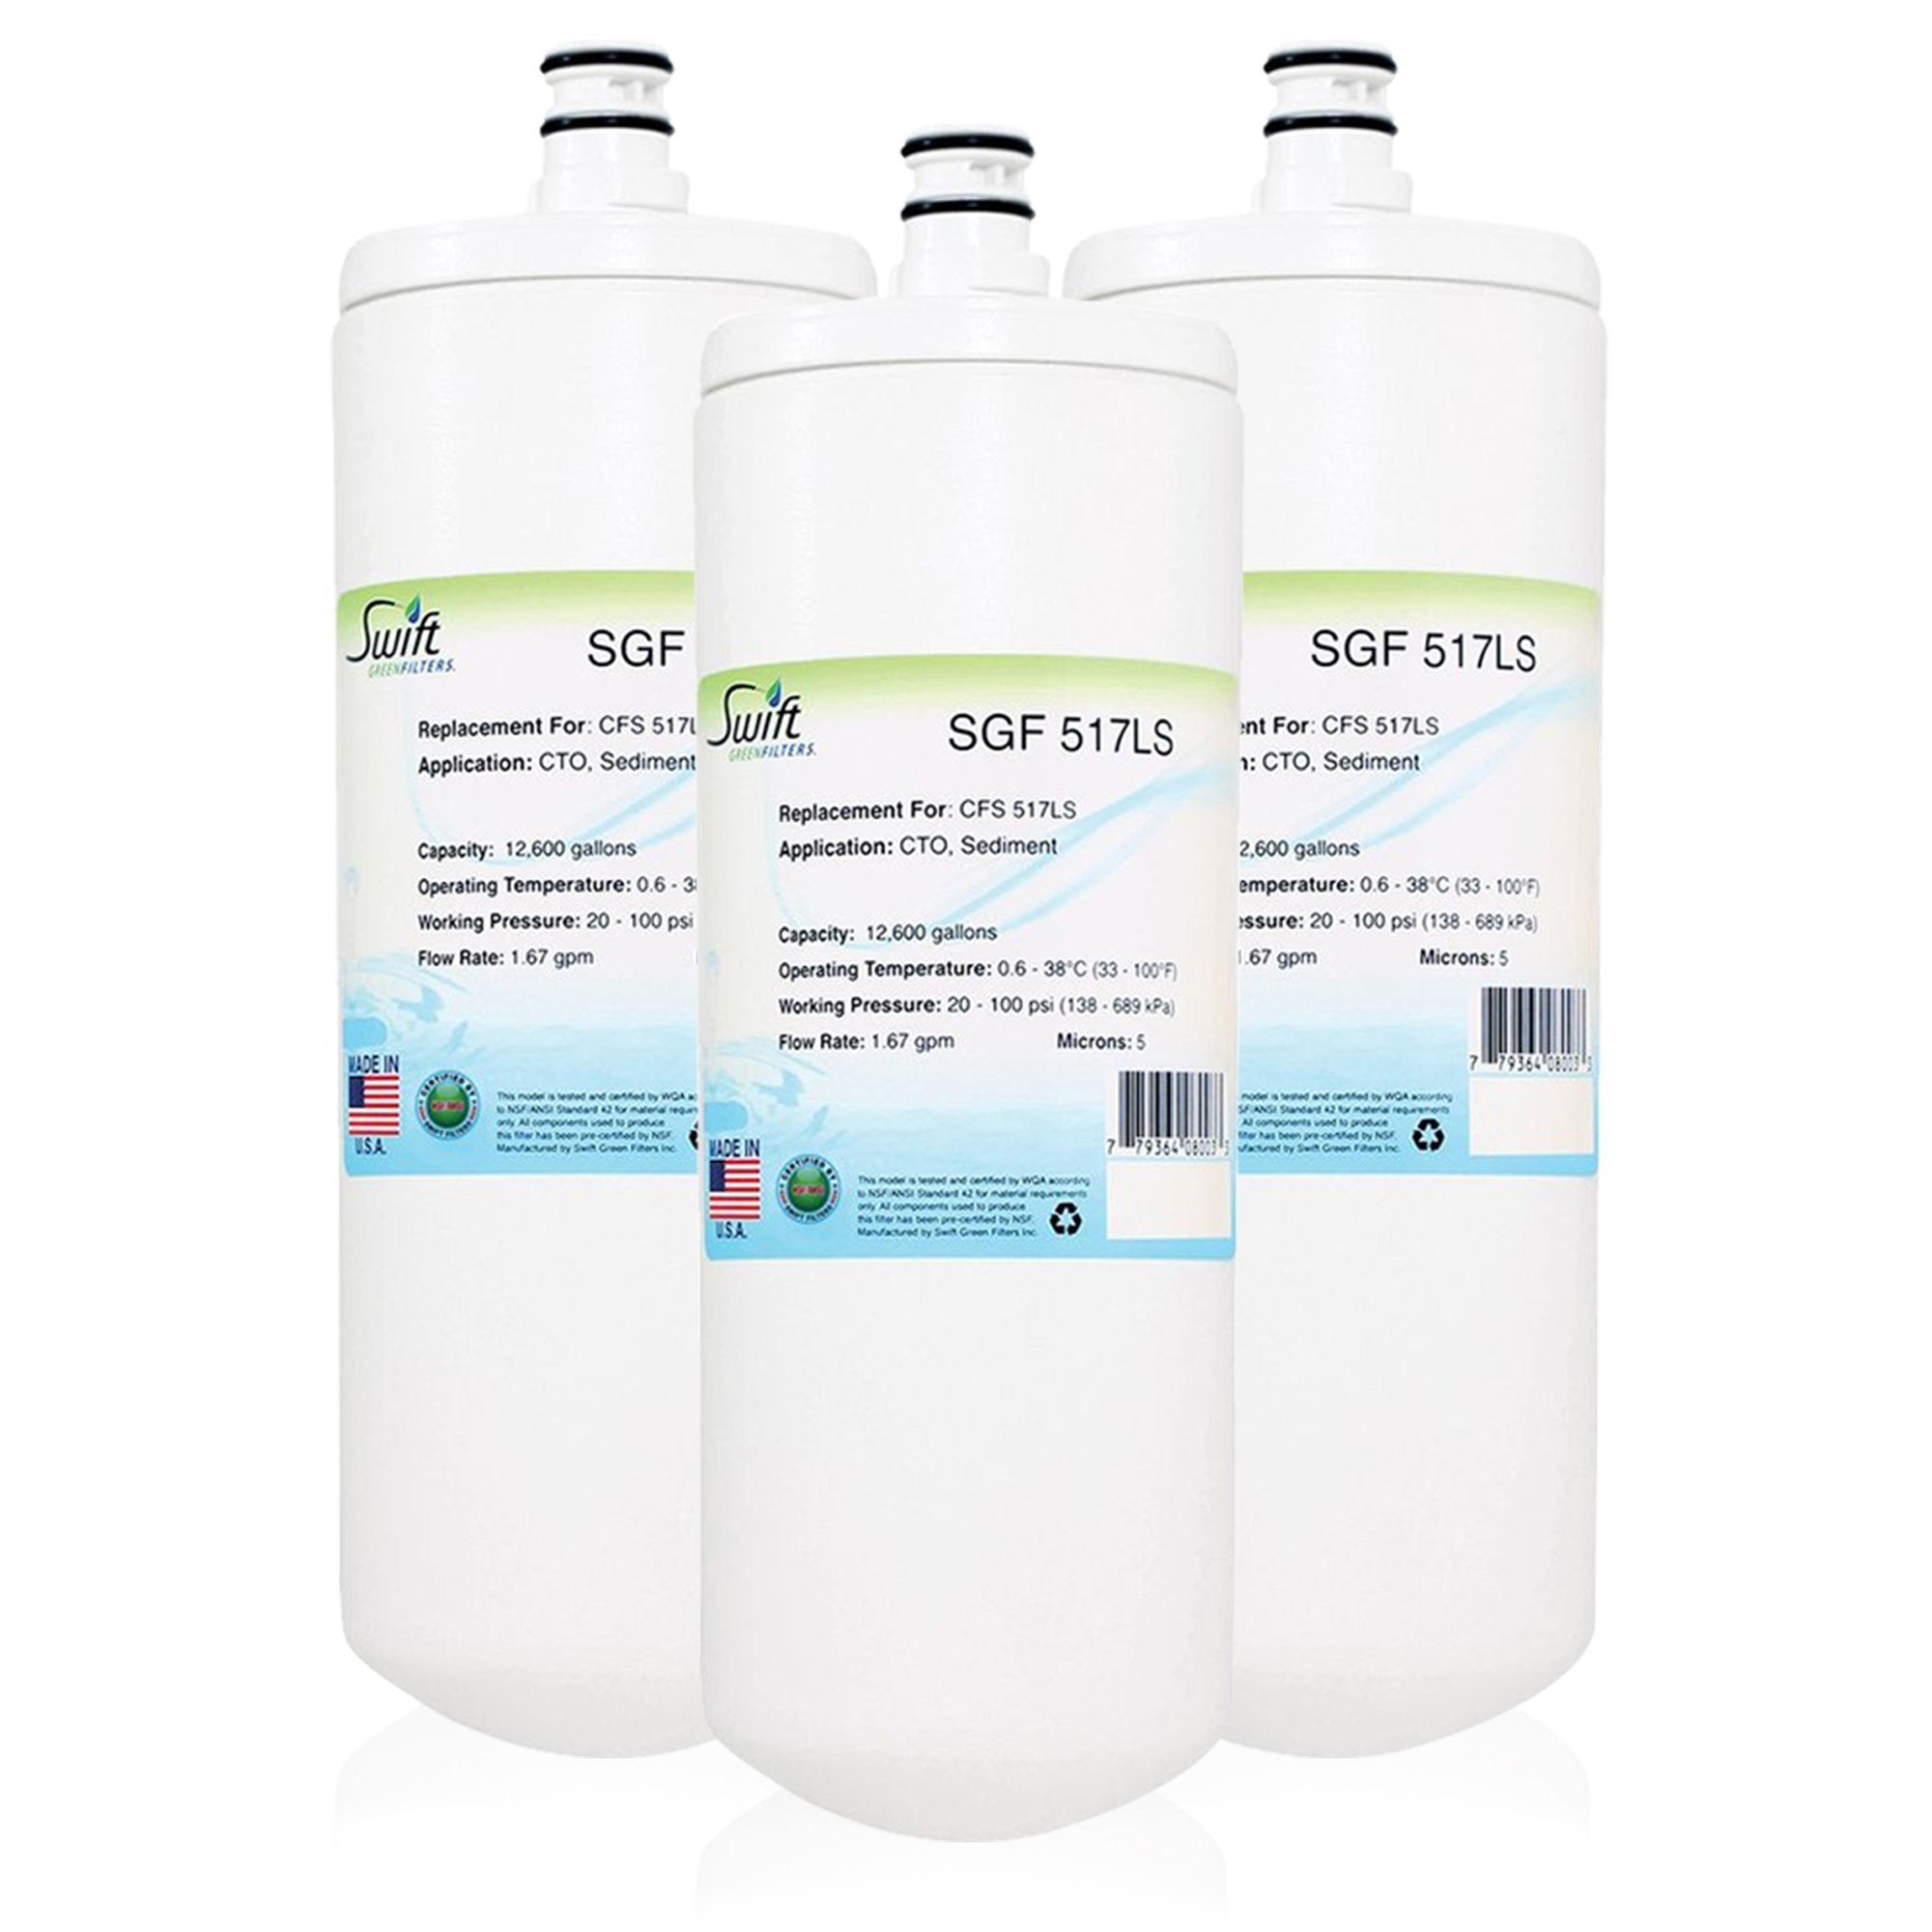 Replacement for 3M CFS517LS Filter by Swift Green Filters SGF 517LS